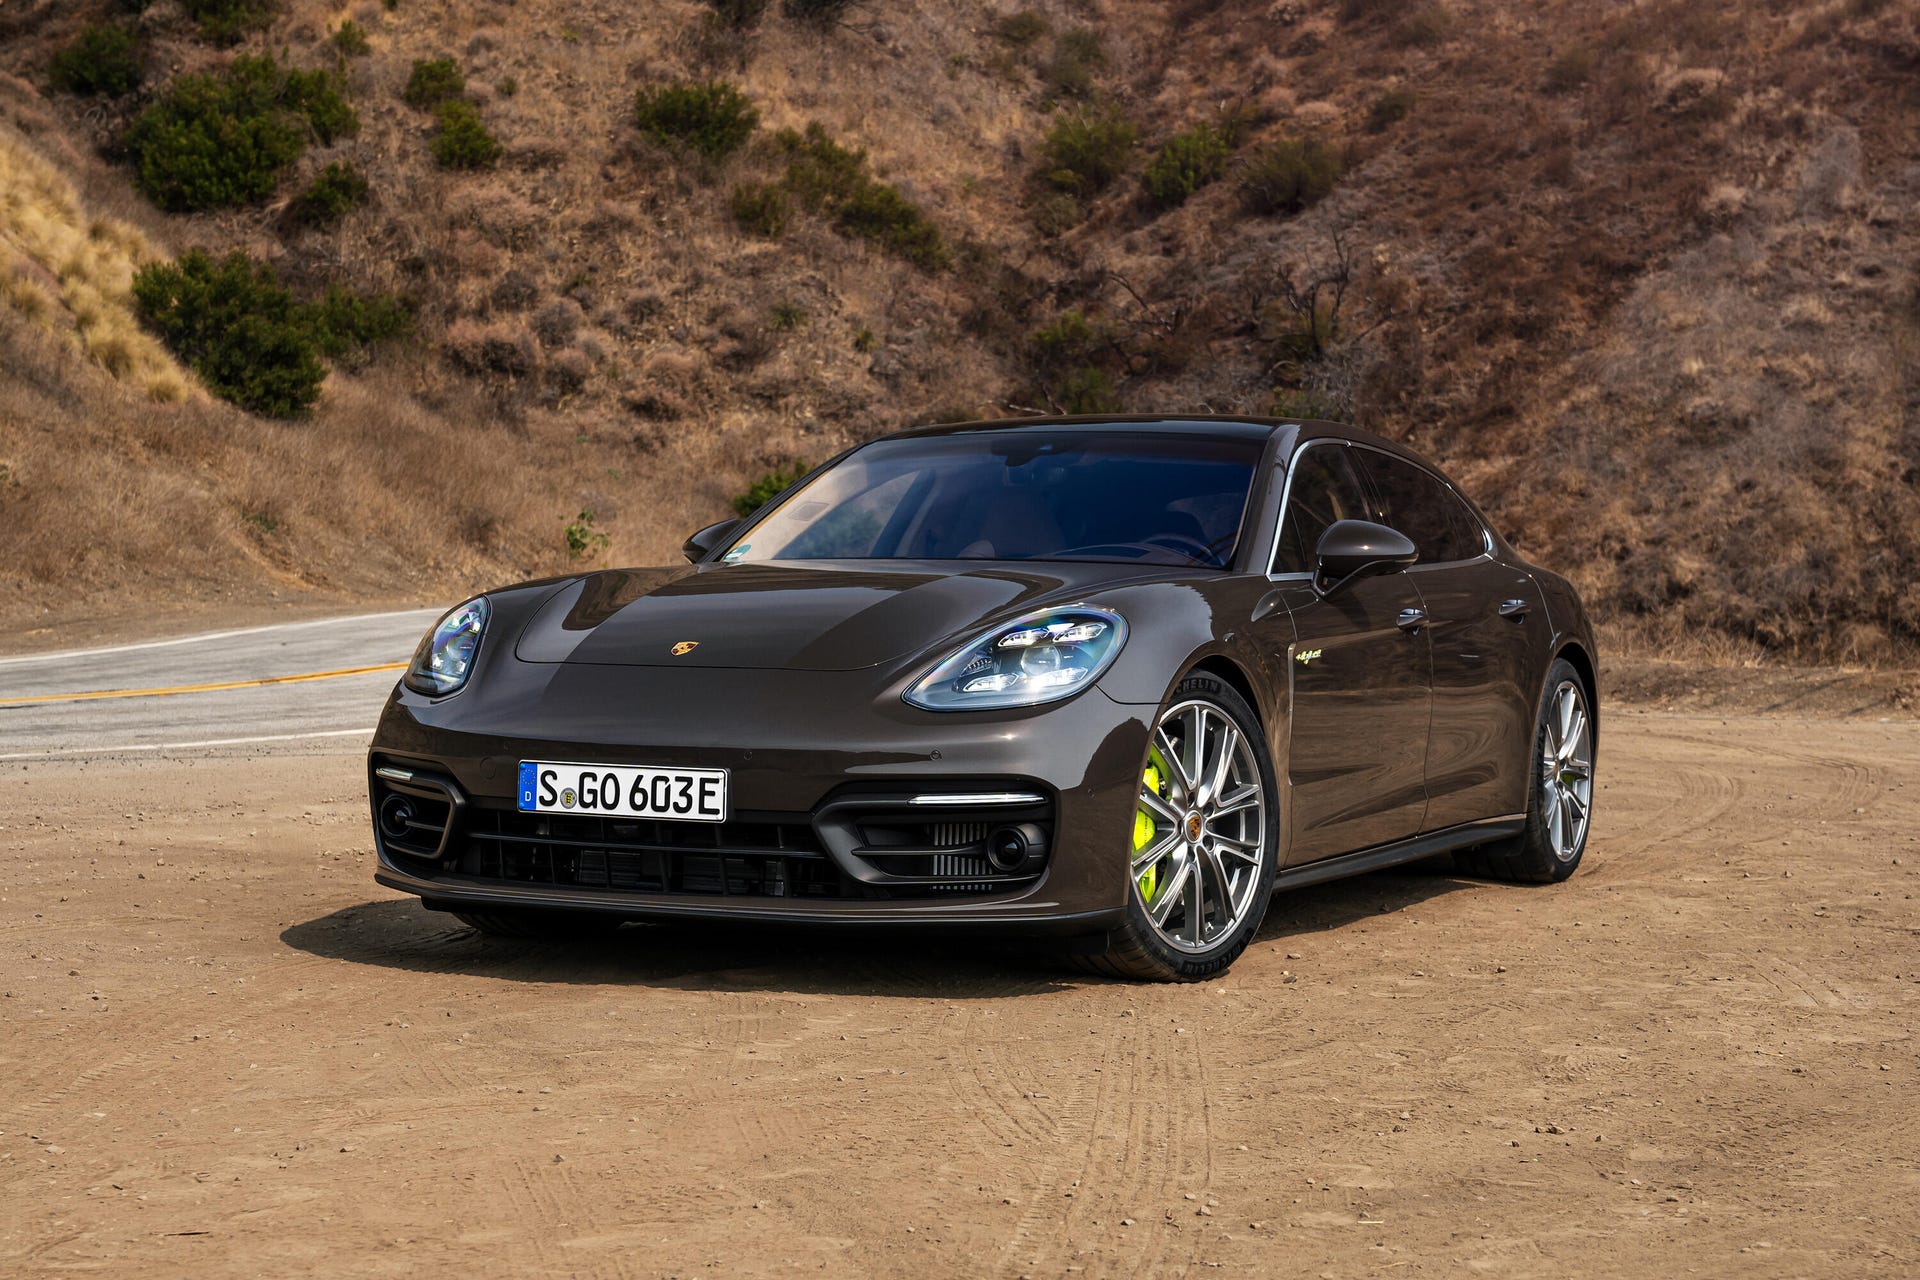 2021 Porsche Panamera 4S E-Hybrid first drive review: The best of all  worlds - CNET